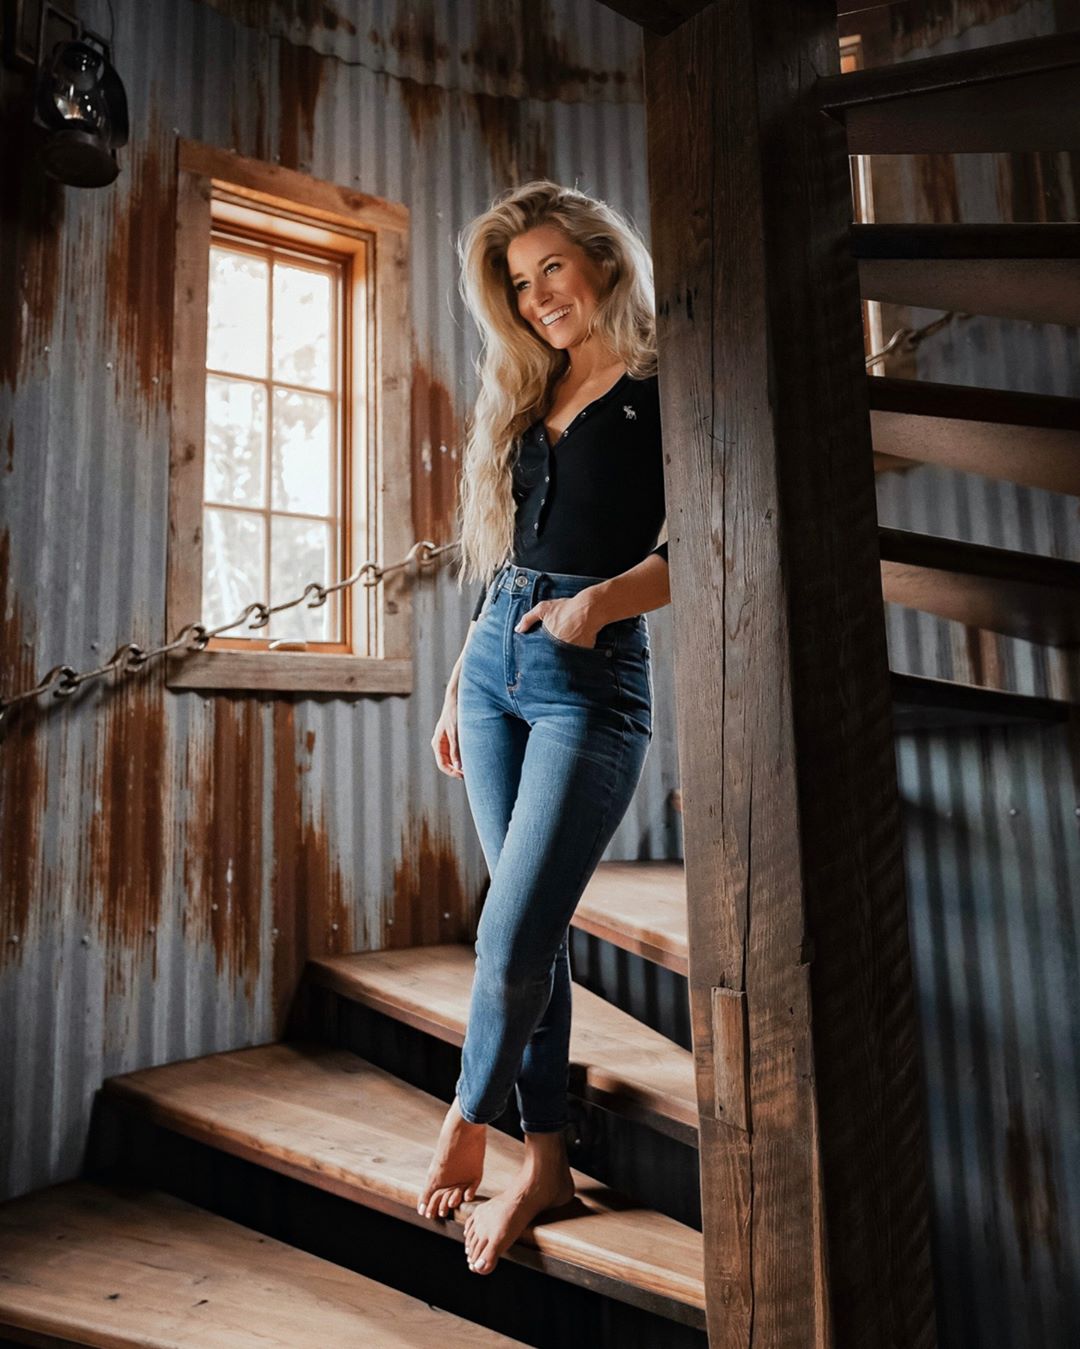 Abercrombie & Fitch - Fits like a dream. 😍✨ “I was so excited to create my own custom pair of A&F jeans that combine all my favorite elements: a tapered high waist, a cropped ankle length, a stretchy...